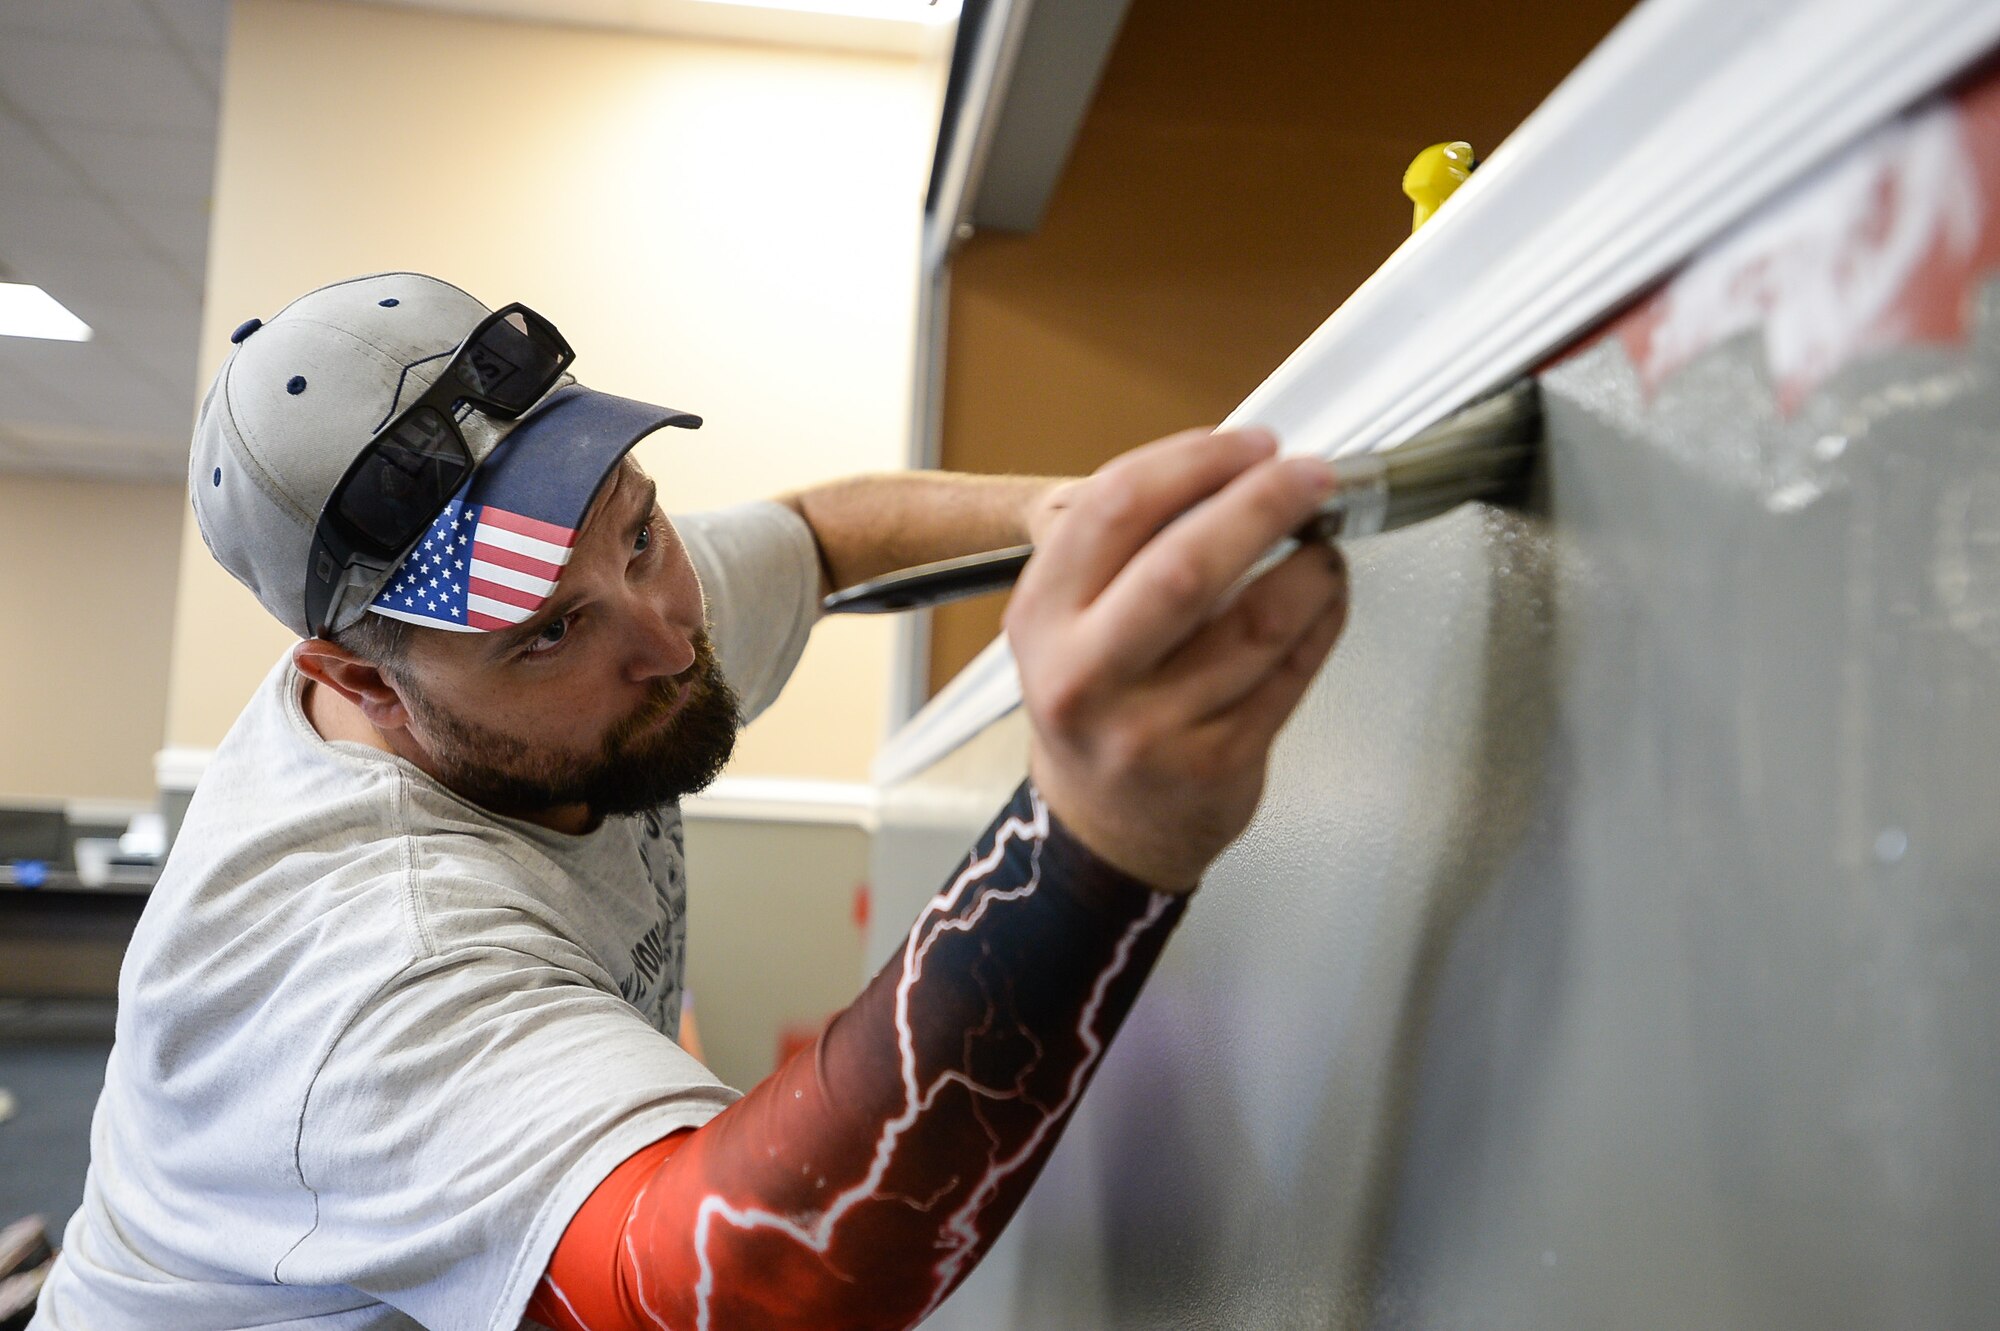 Layton Lowe’s employee Mike Rogers paints an edge in the Airman Recreation Center, Hill Air Force Base, Utah, during a community relations project, Sept. 13, 2016. (U.S. Air Force photo by R. Nial Bradshaw)